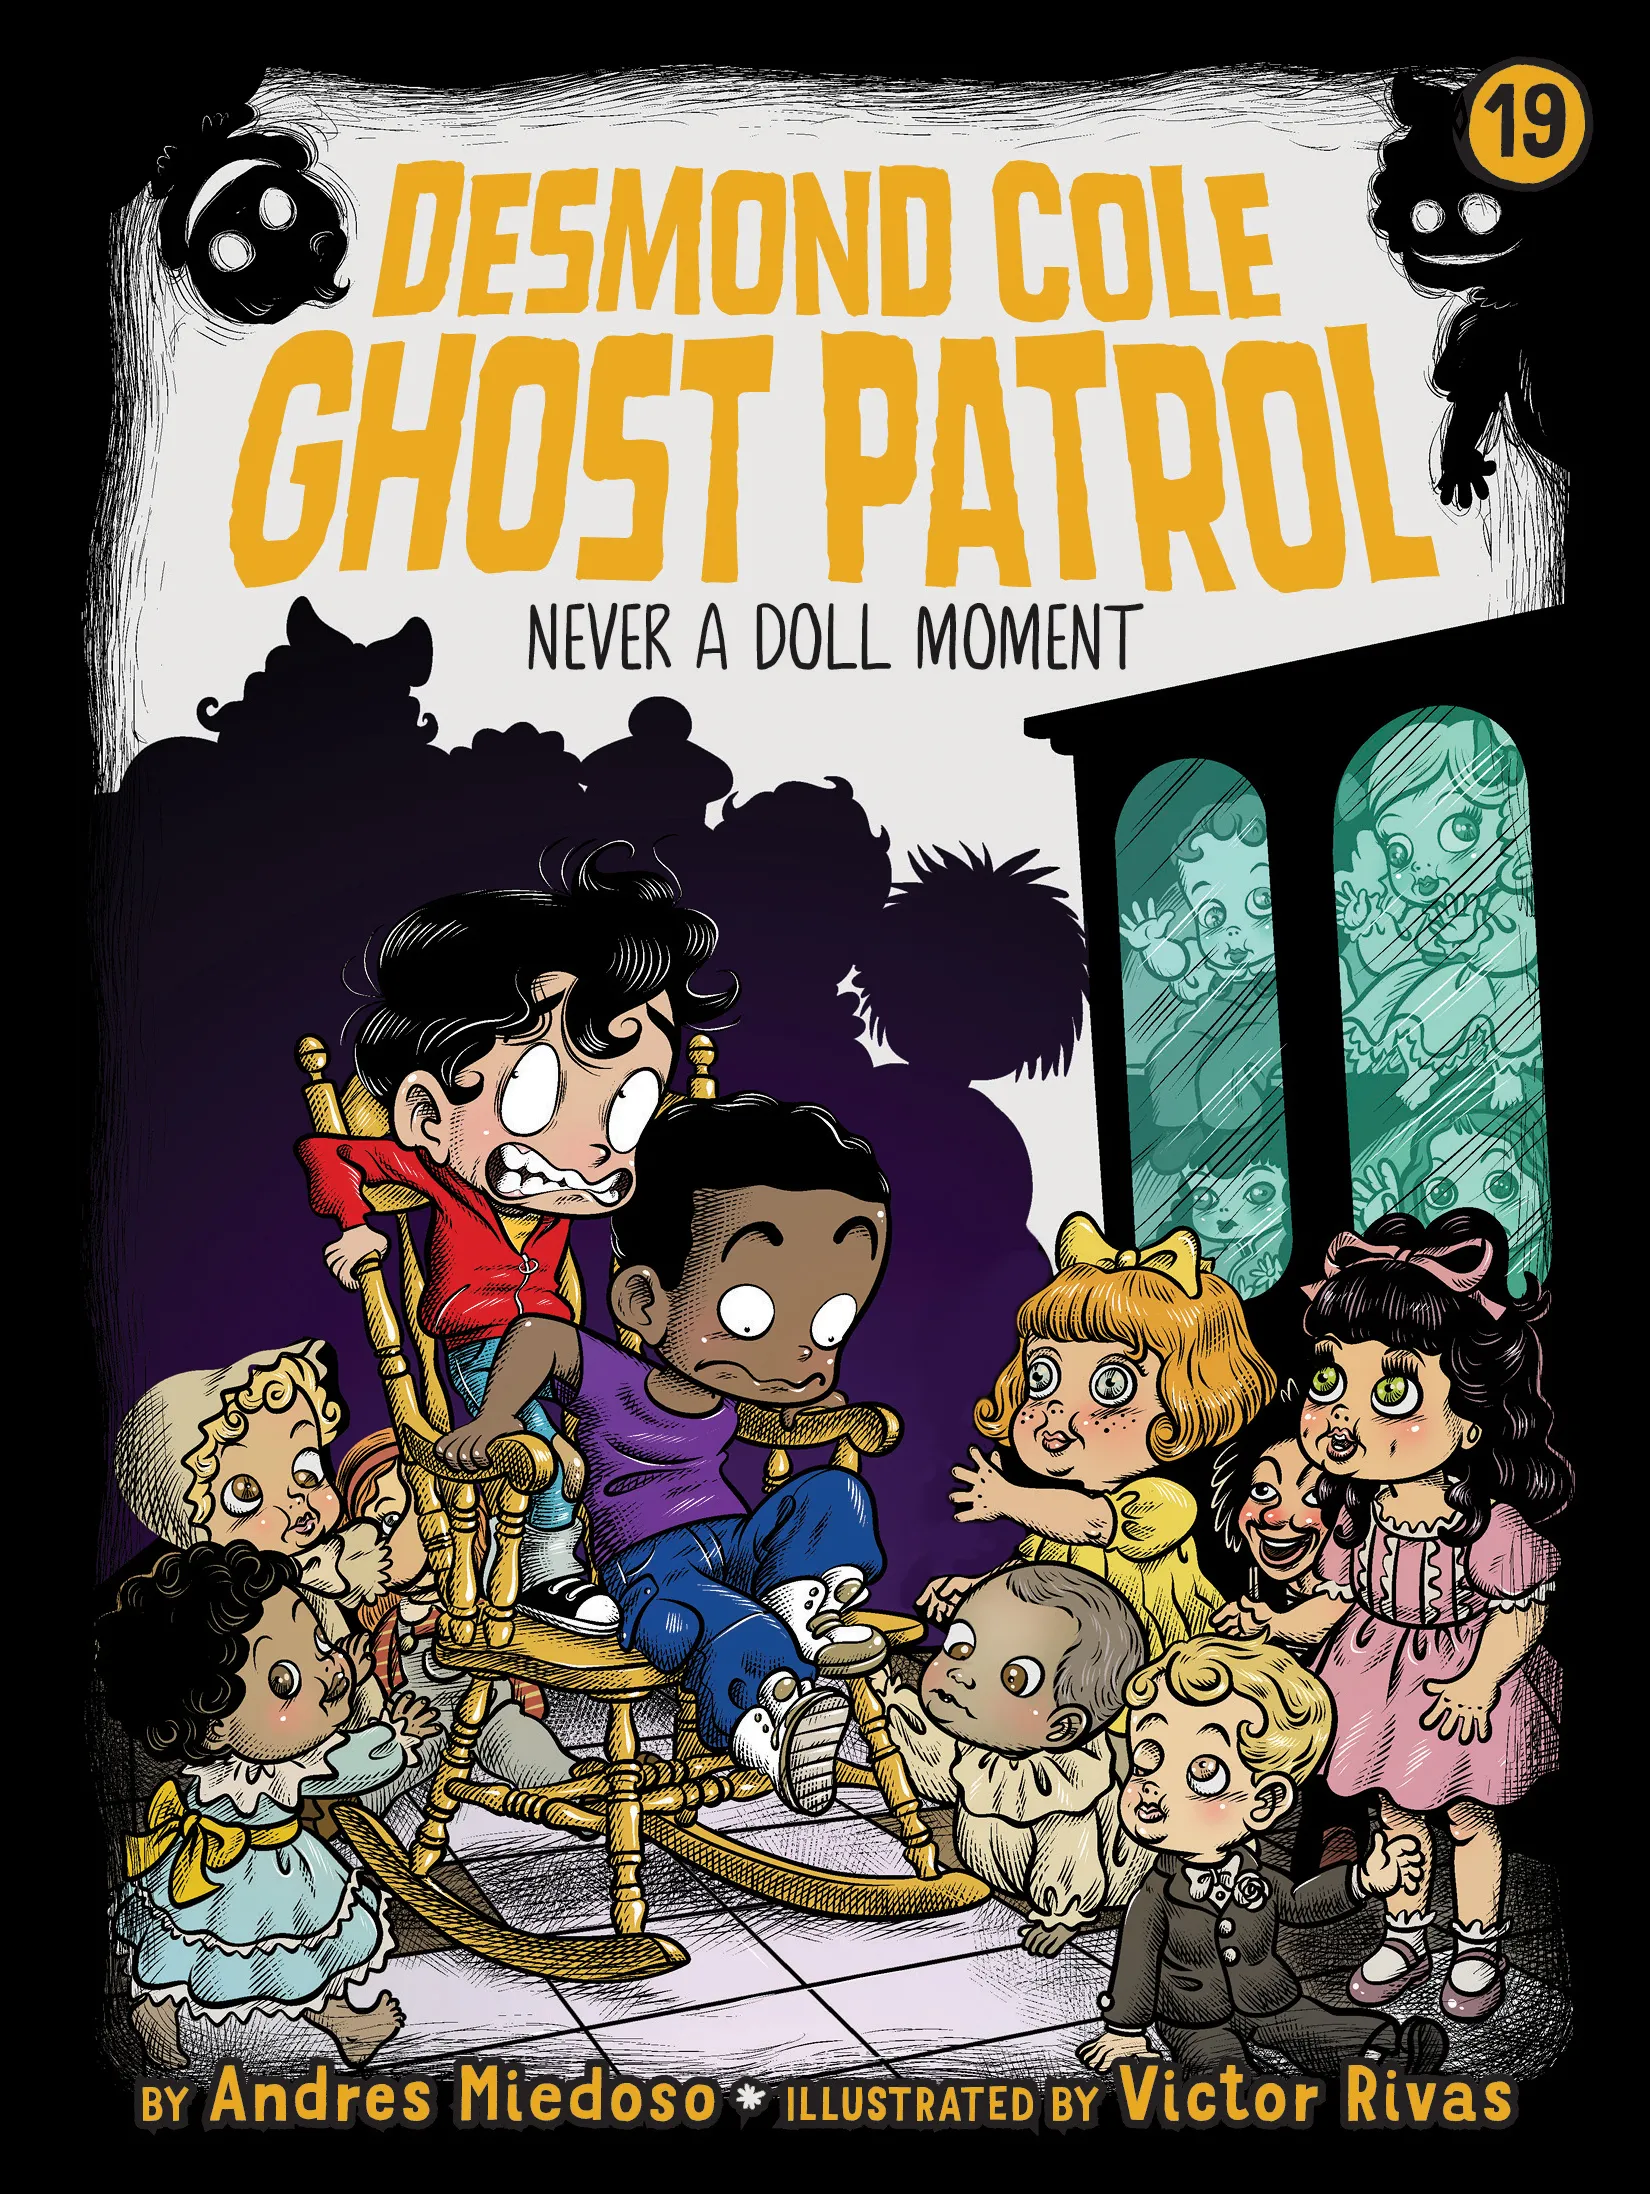 Never a Doll Moment (Desmond Cole Ghost Patrol #19)